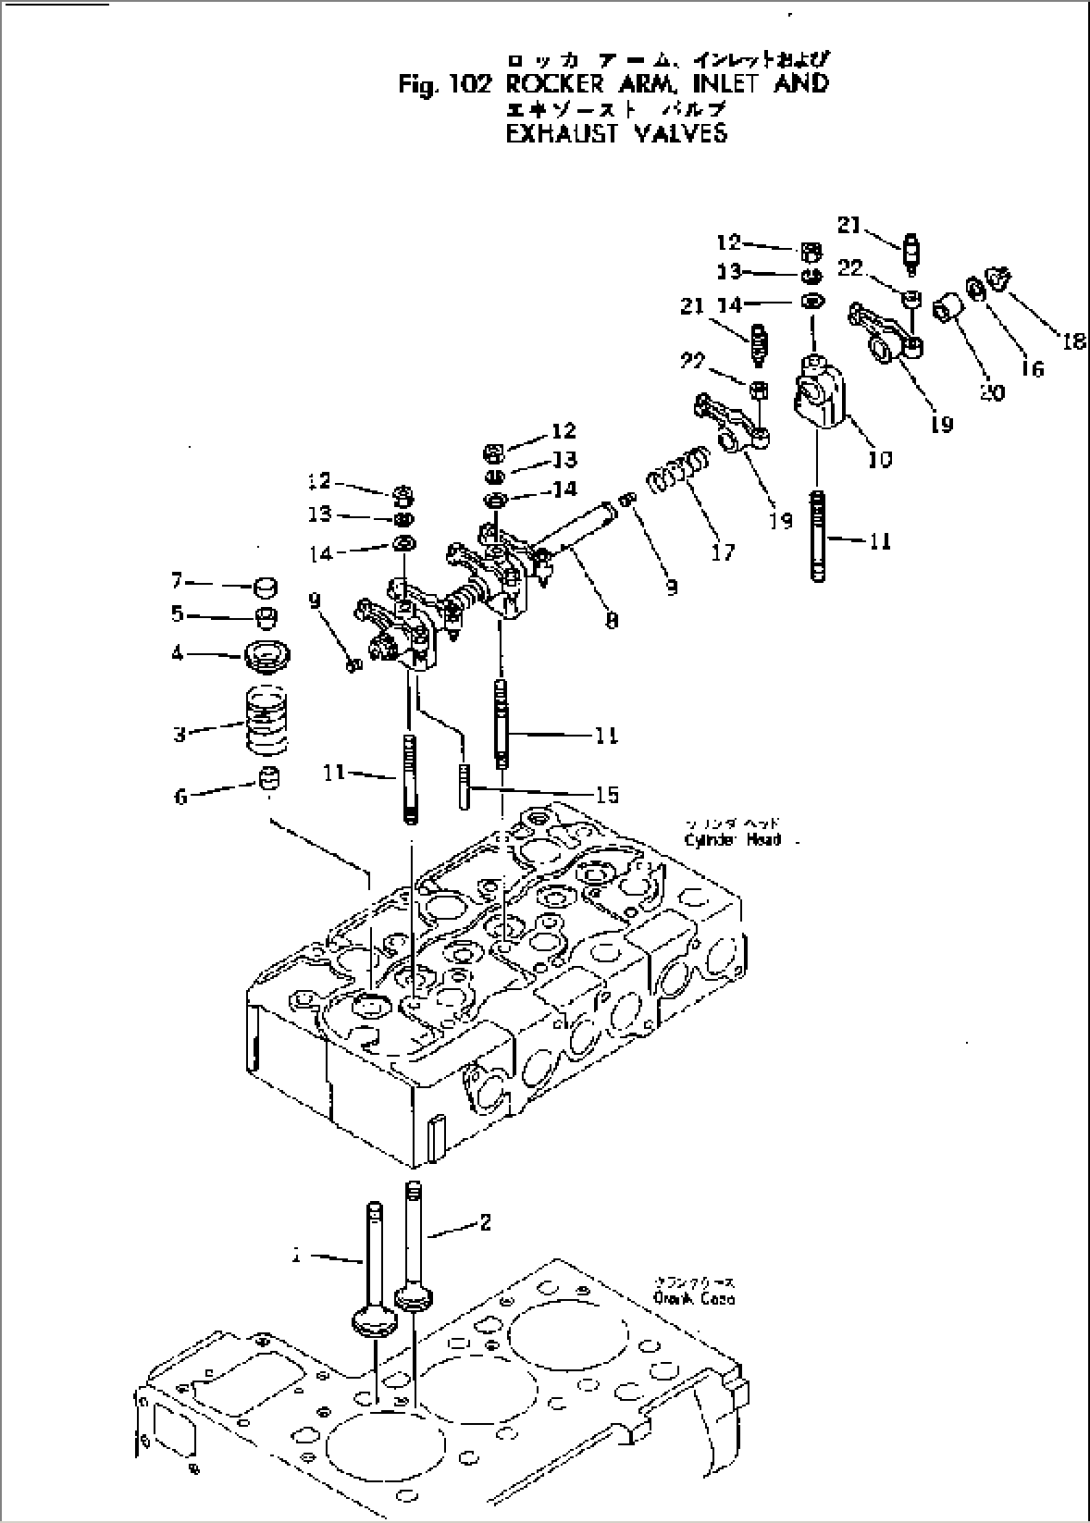 ROCKER ARM¤ INLET AND EXHAUST VALVES